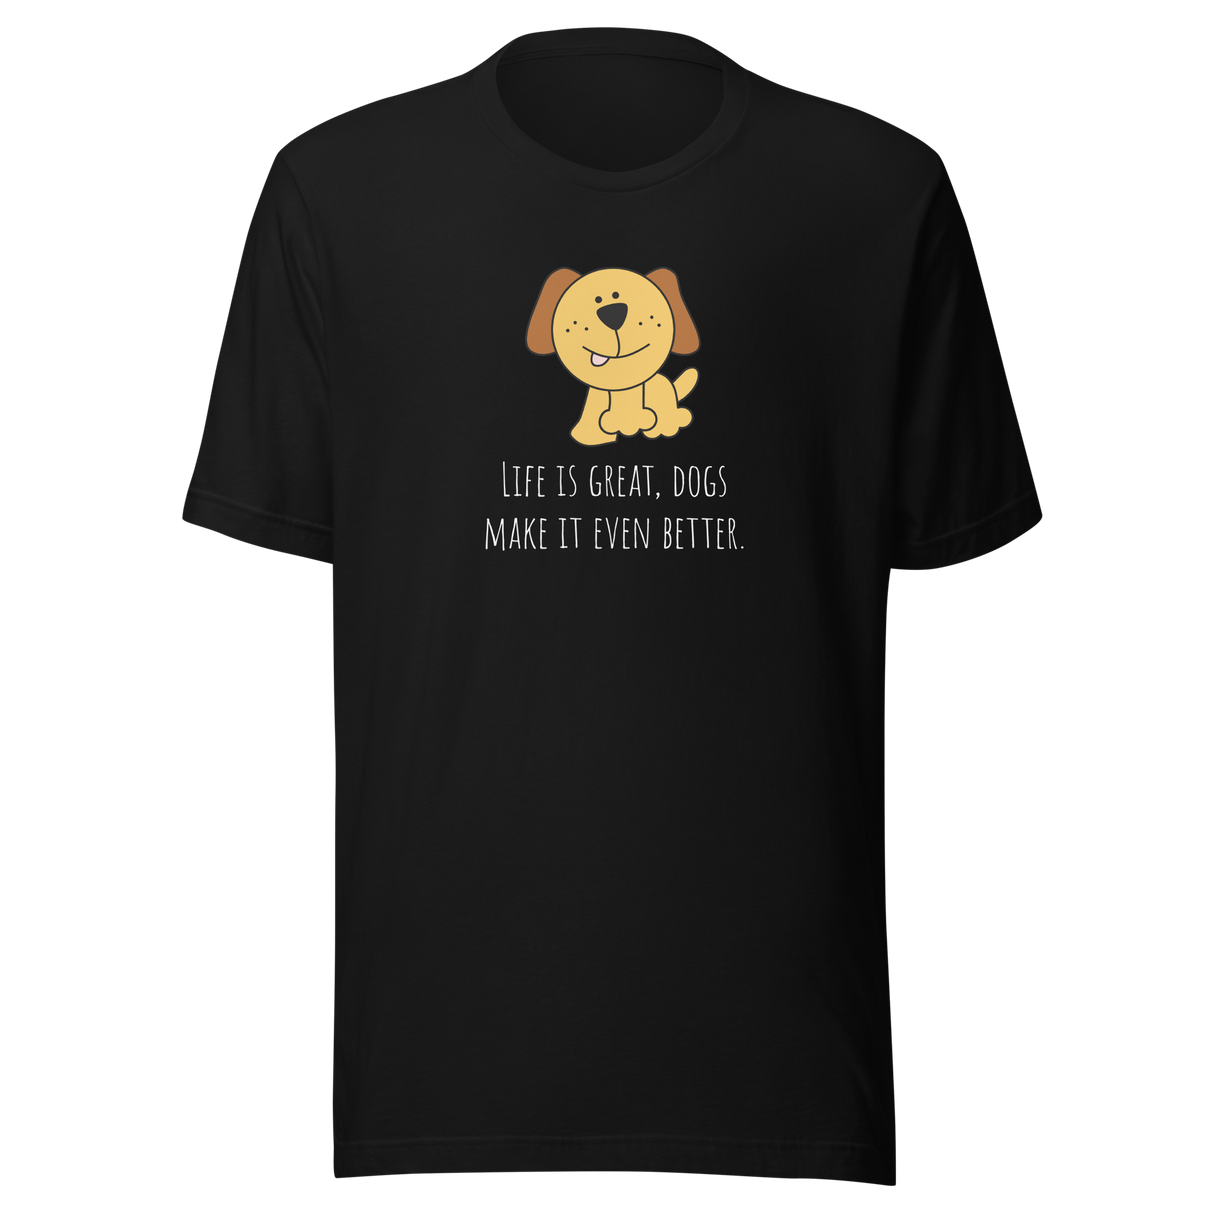 life-is-great-dogs-make-it-even-better-dog-tee-dog-over-people-t-shirt-cute-tee-dog-lover-t-shirt-dog-mom-tee#color_black